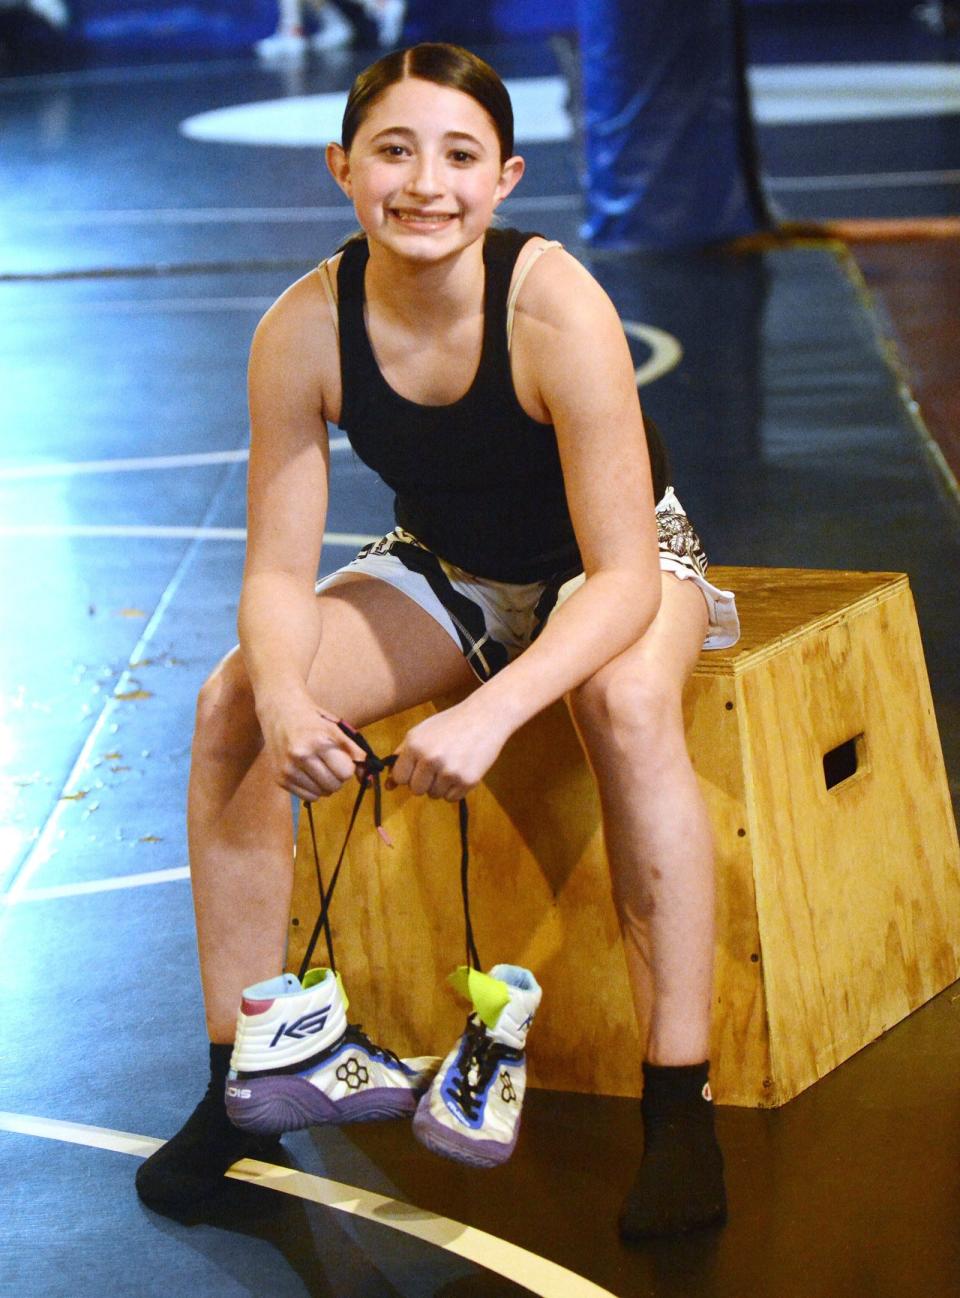 New England Wrestling champion Zsofia Quiles, 11, of Norwich, works out at MarcAurele Wrestling in Niantic.